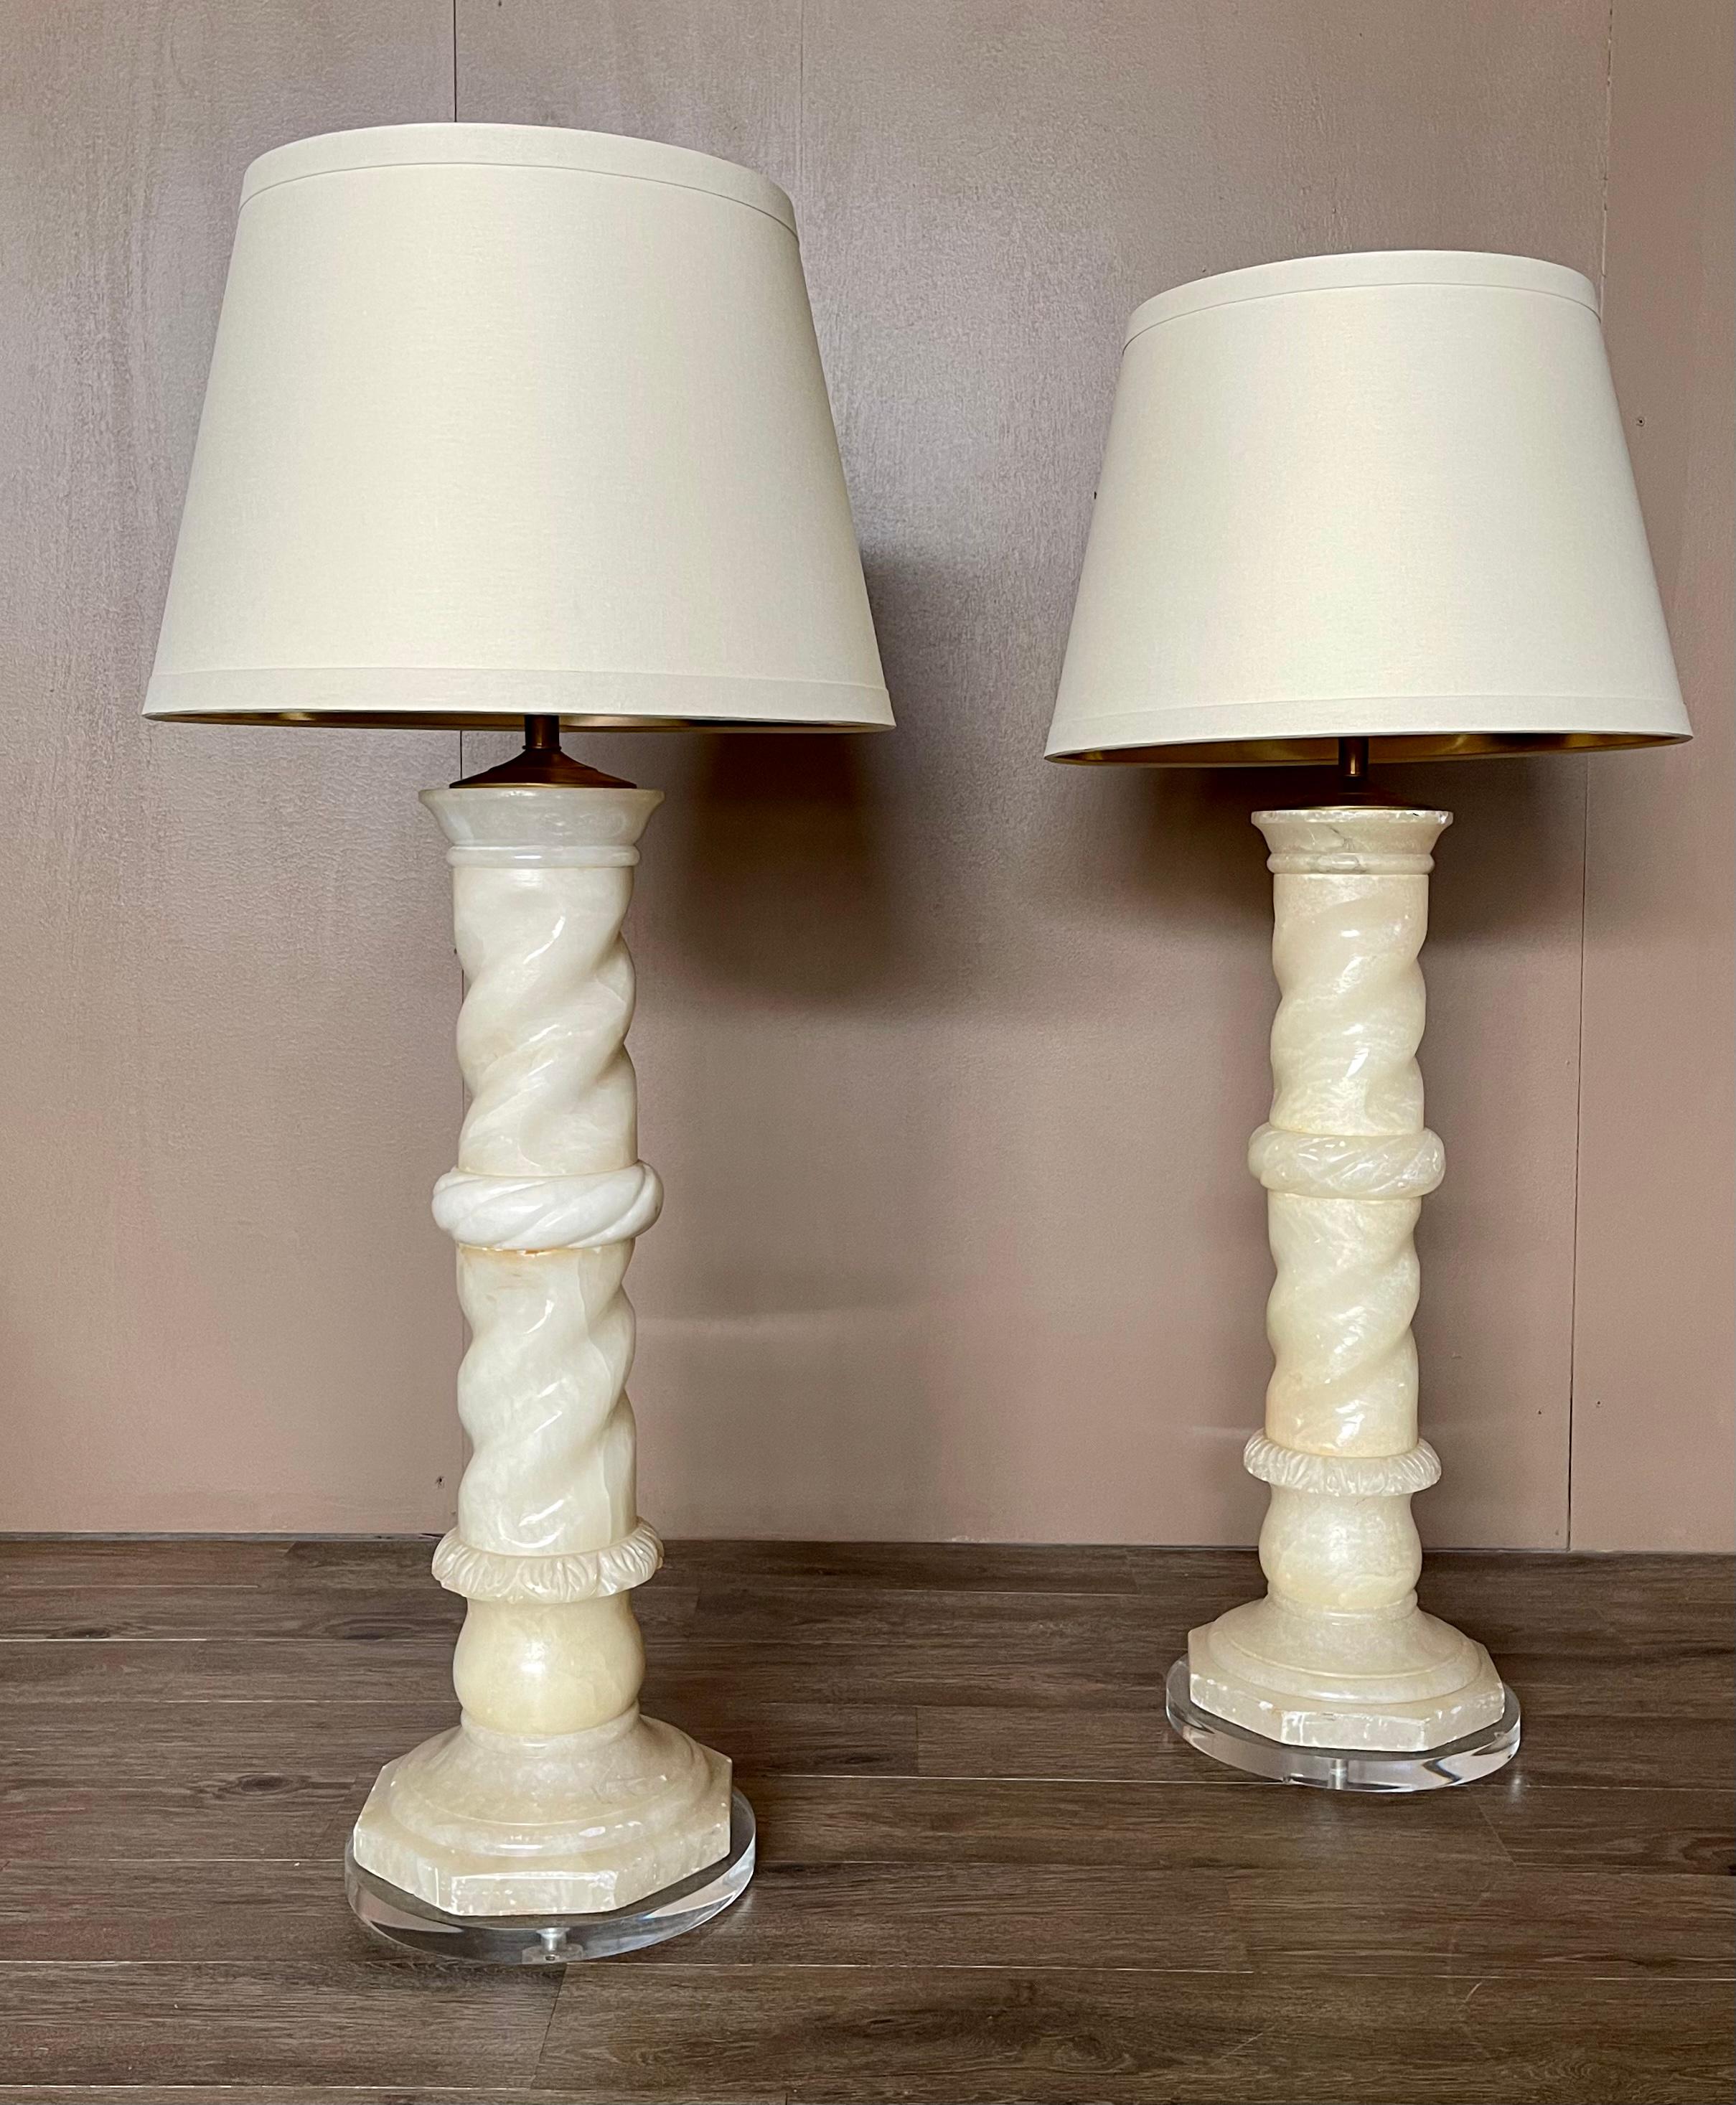 Baroque Revival Pair Antique Italian Architectural Alabaster Lamps, Lucite Bases, Spiral Carved For Sale